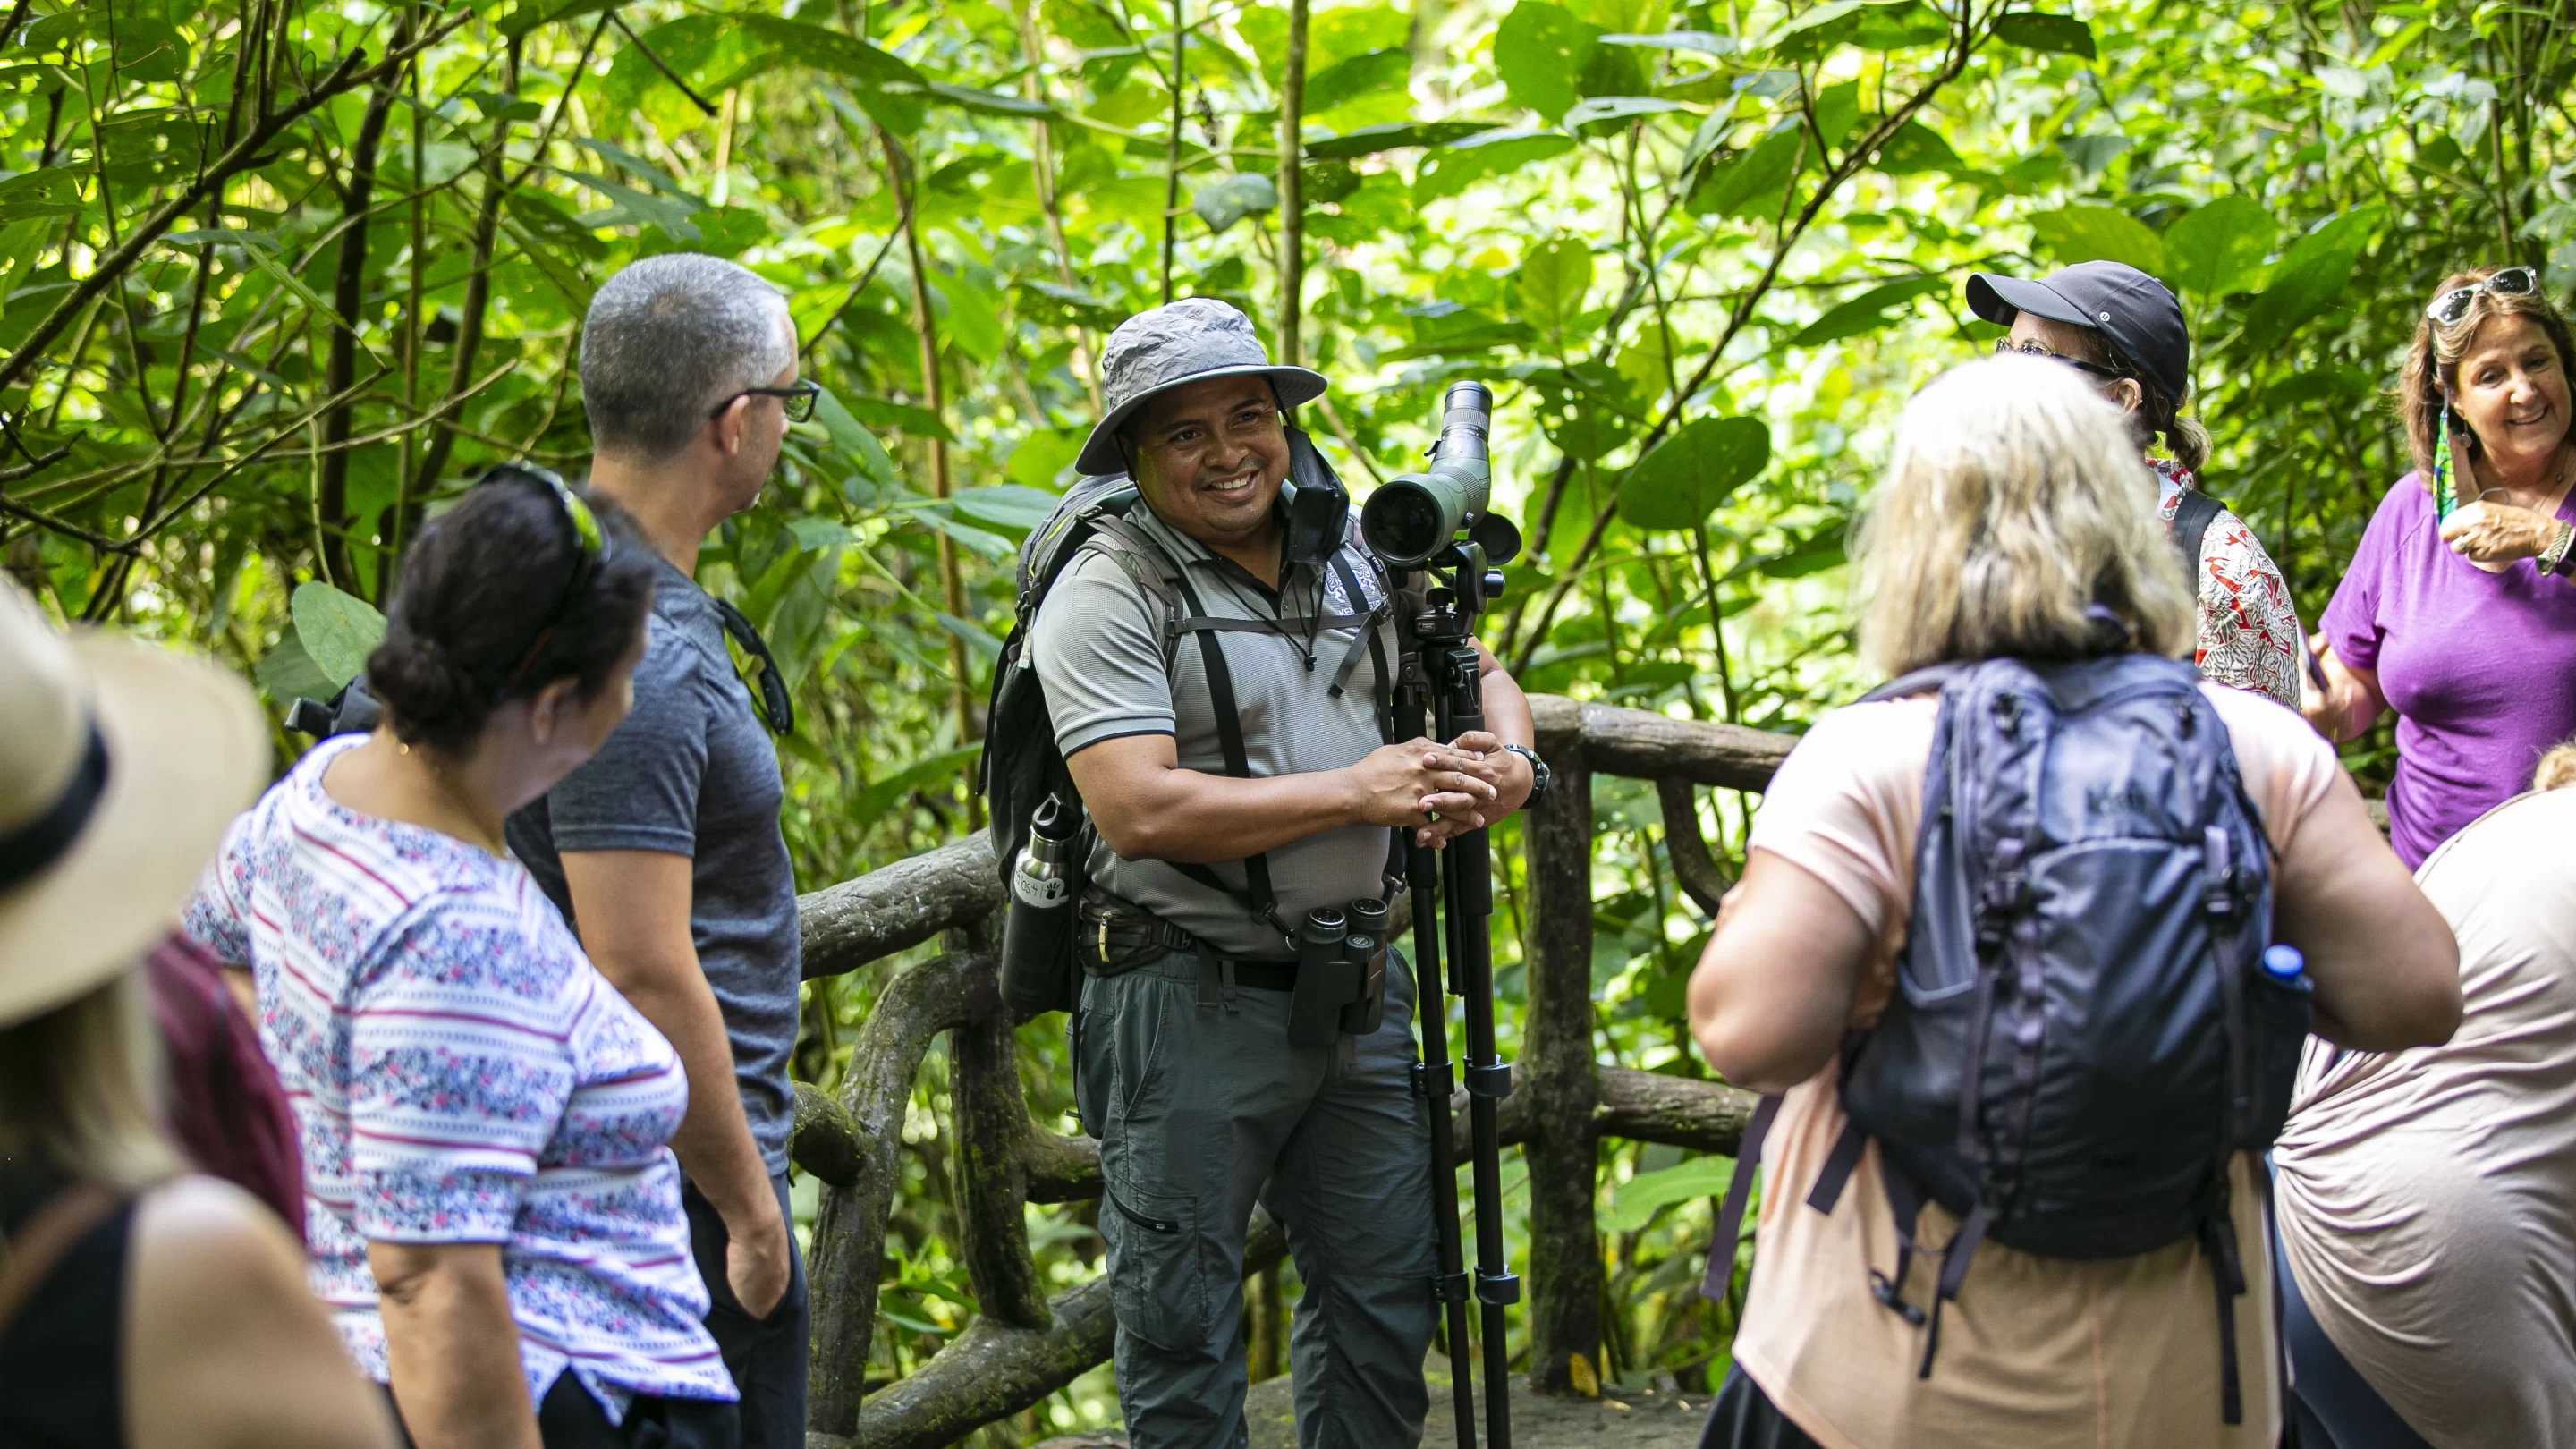 Explore the untouched beauty of Costa Rica's national parks, where nature's wonders come alive.